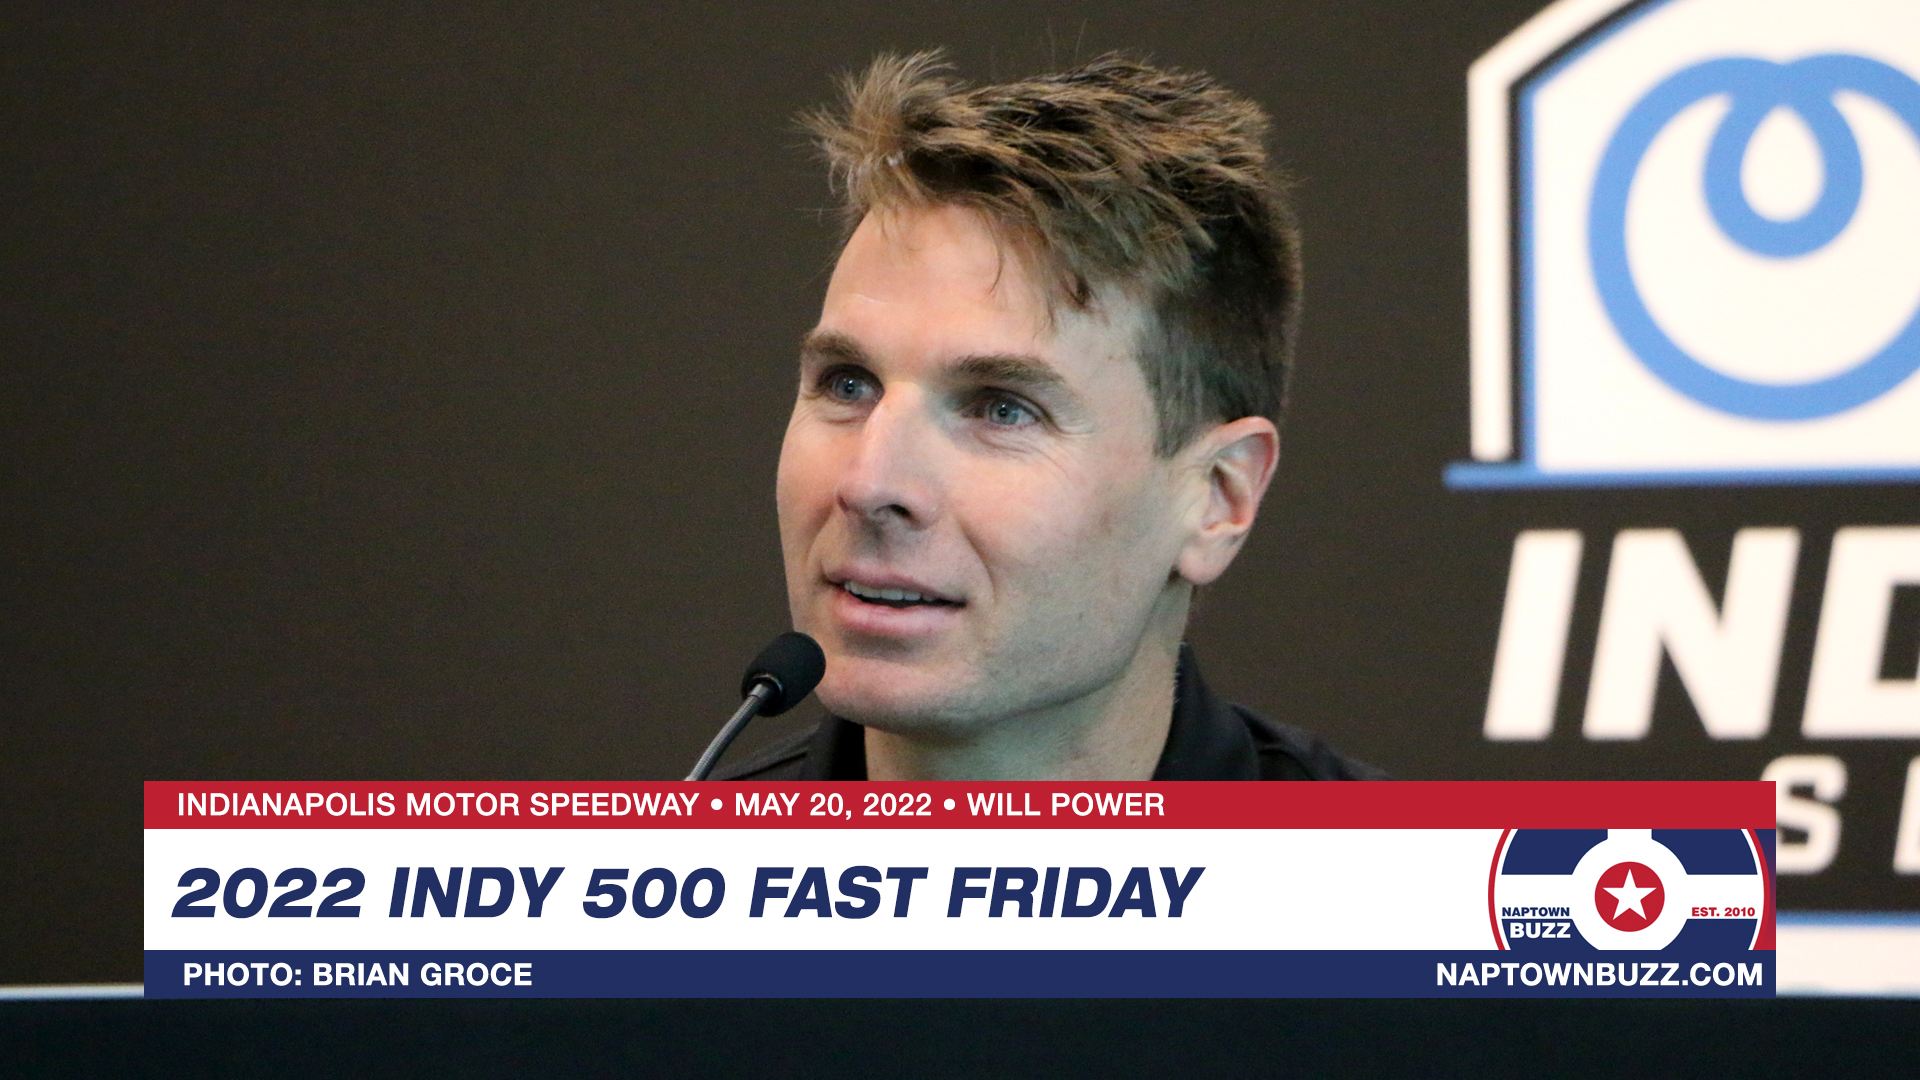 Will Power on Indy 500 Fast Friday Practice at Indianapolis Motor Speedway on May 20, 2022